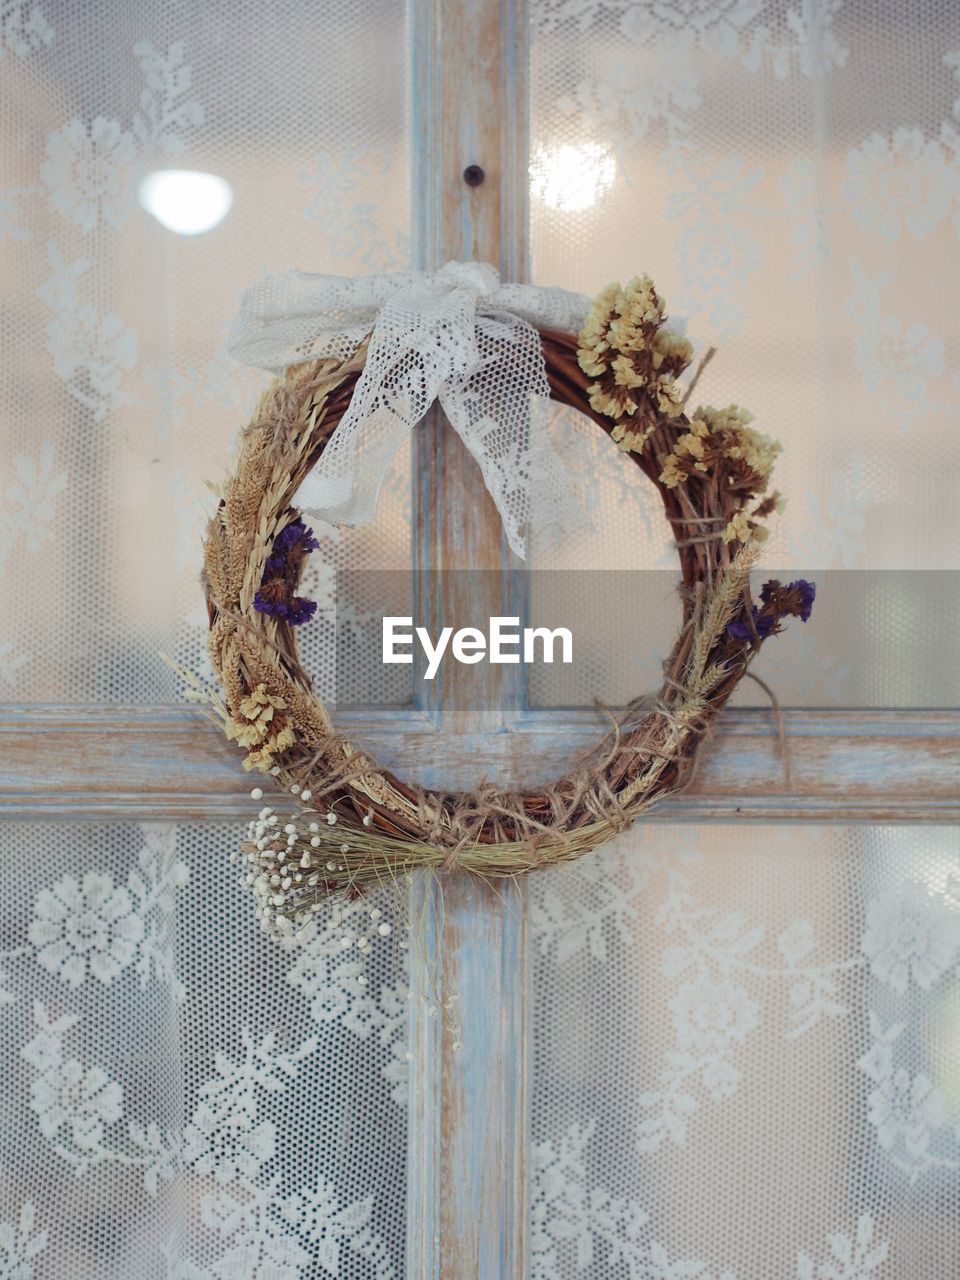 Wreath hanging against wall